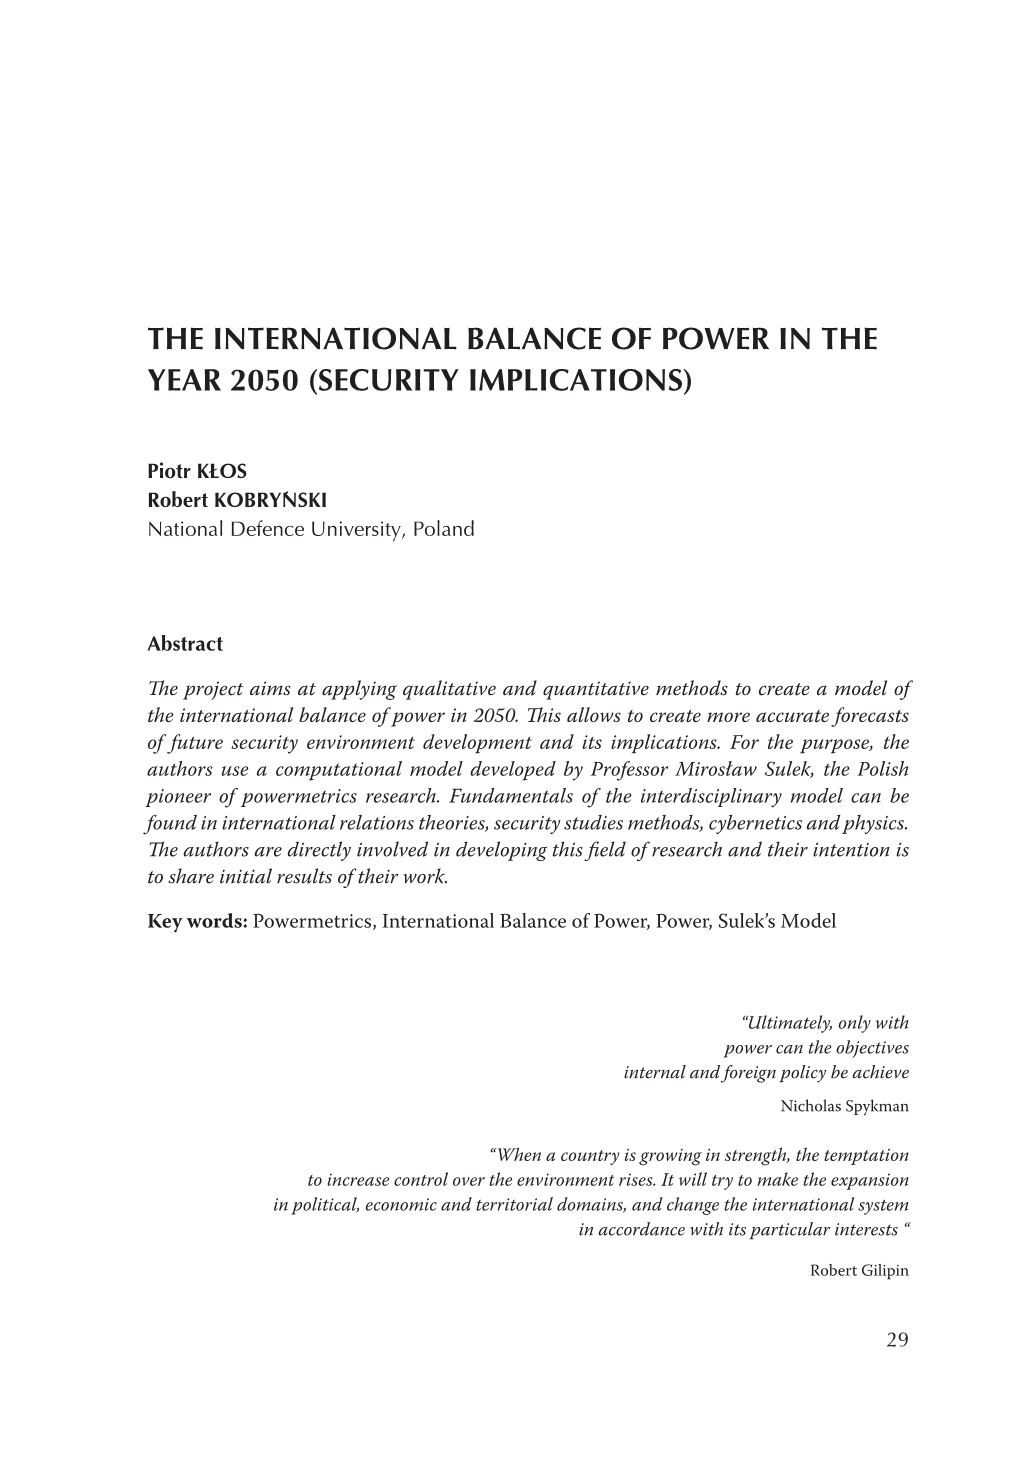 The International Balance of Power in the Year 2050 (Security Implications)